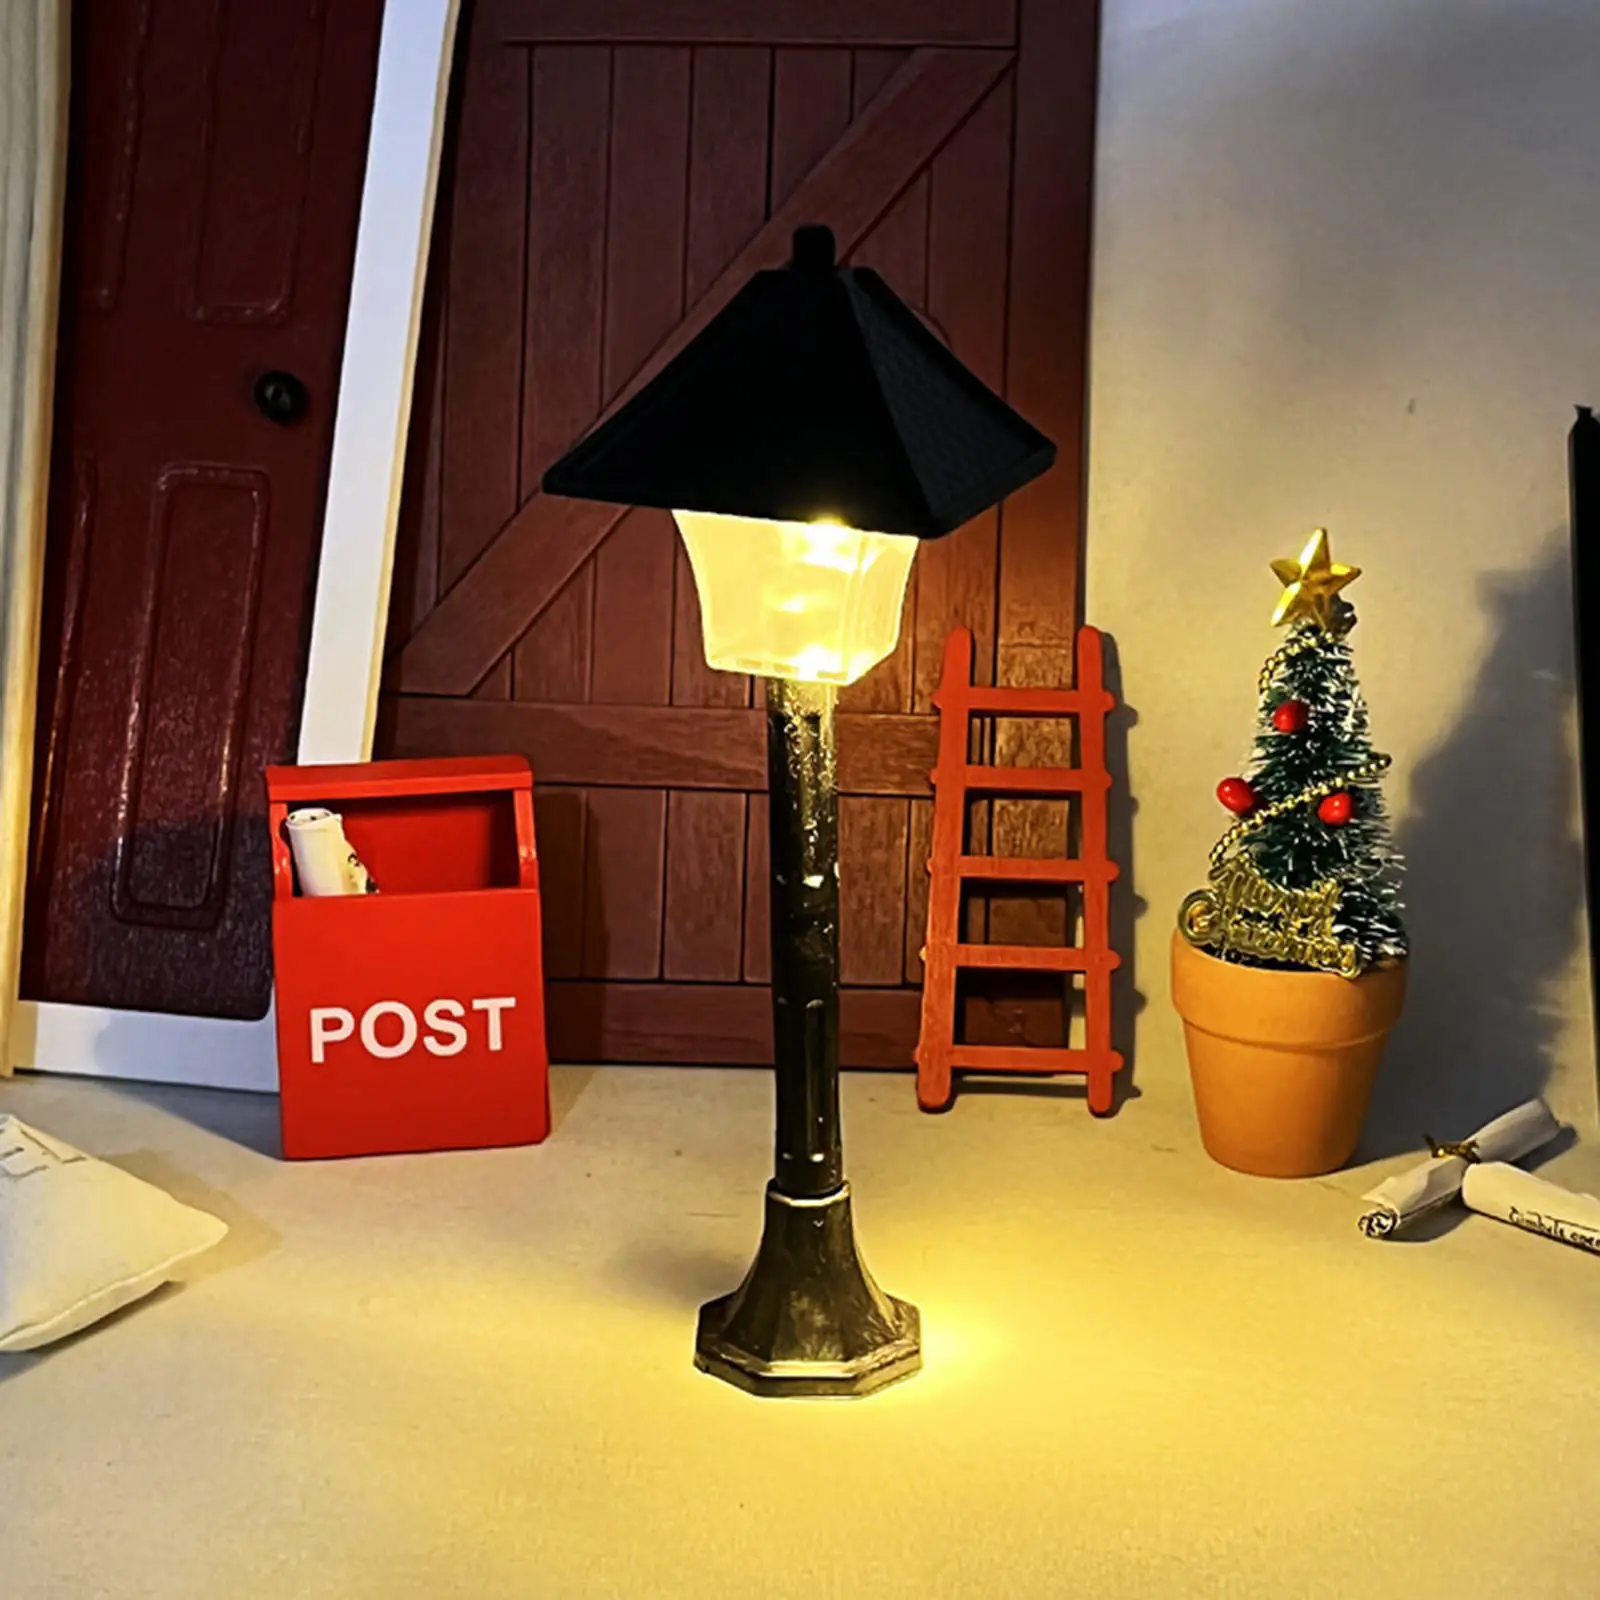 2Pcs Dollhouse Miniature Lamp Post 1:12 Scale Layout Street Light for Garden Micro Landscaping Pathway Decoration Accessories